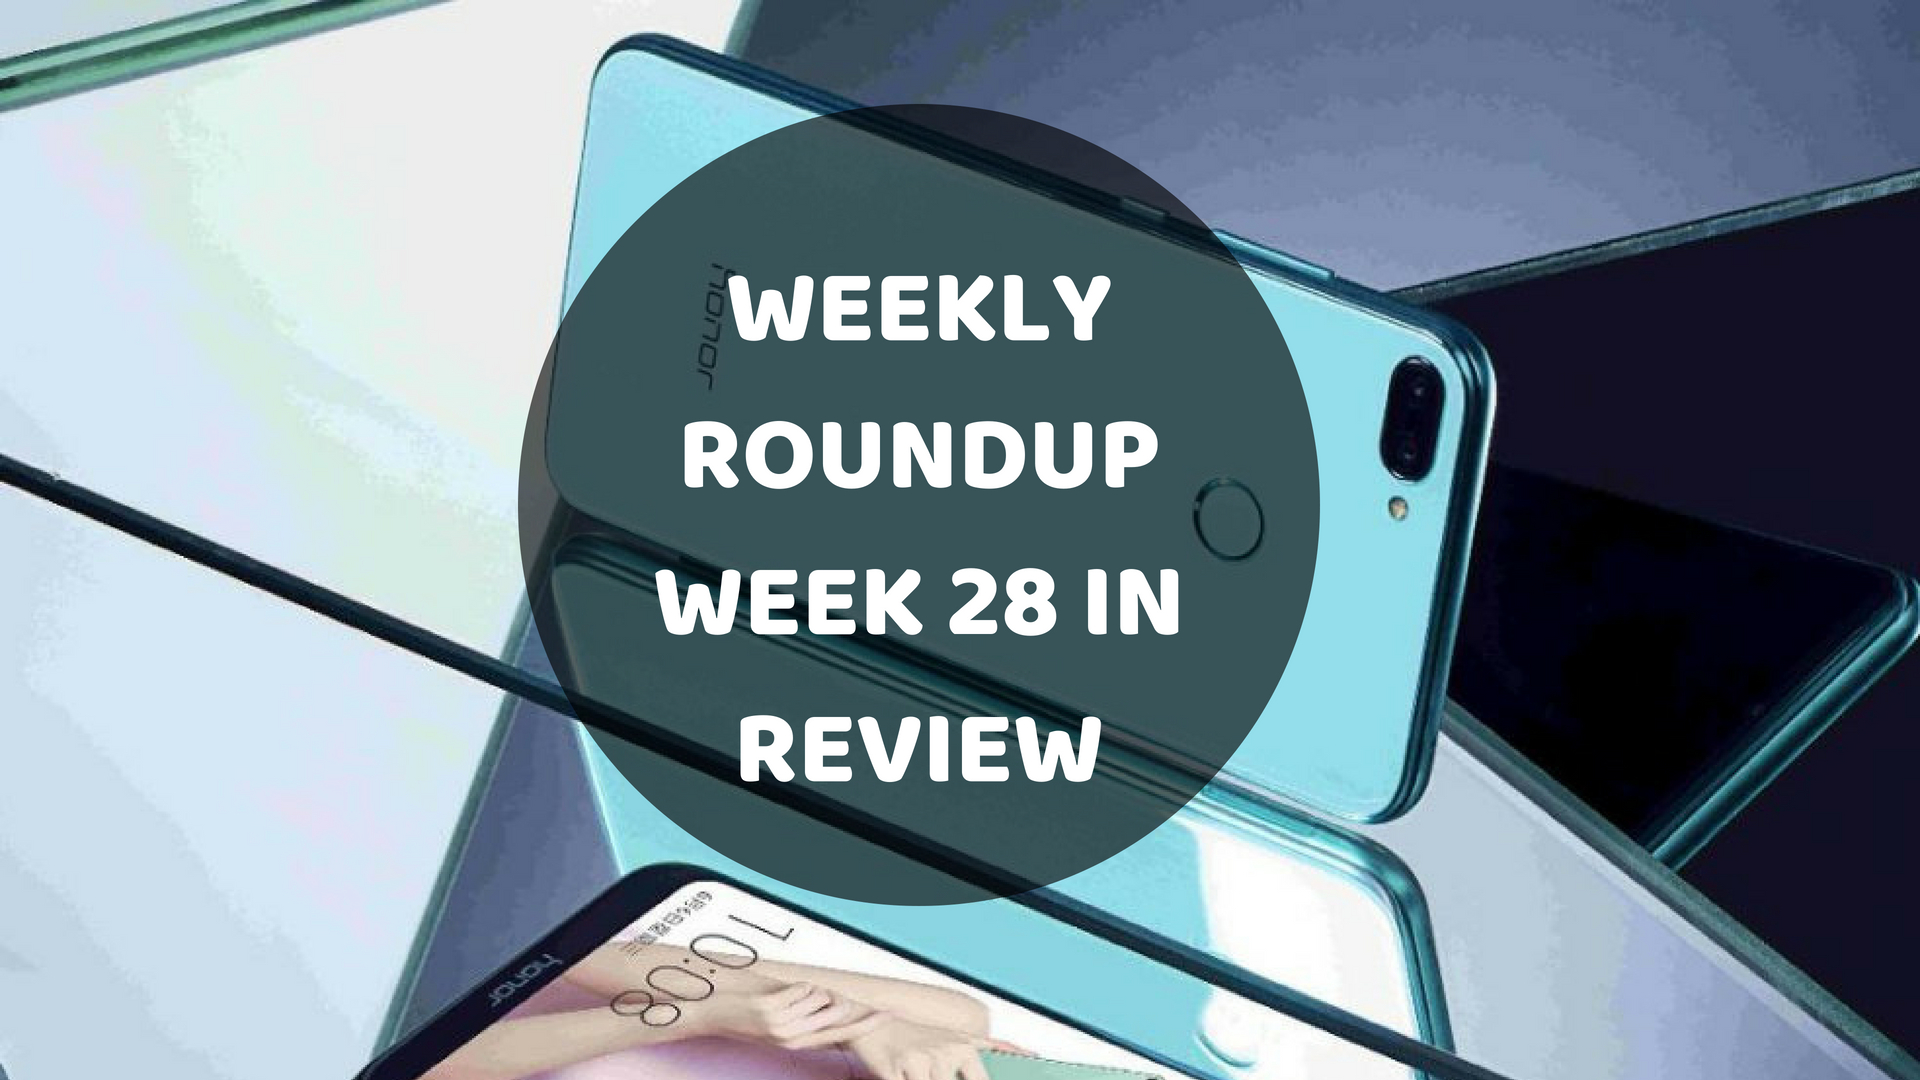 Weekly Roundup: Week 28 in review, Android Pistachio, Amazon Prime day, and more 7